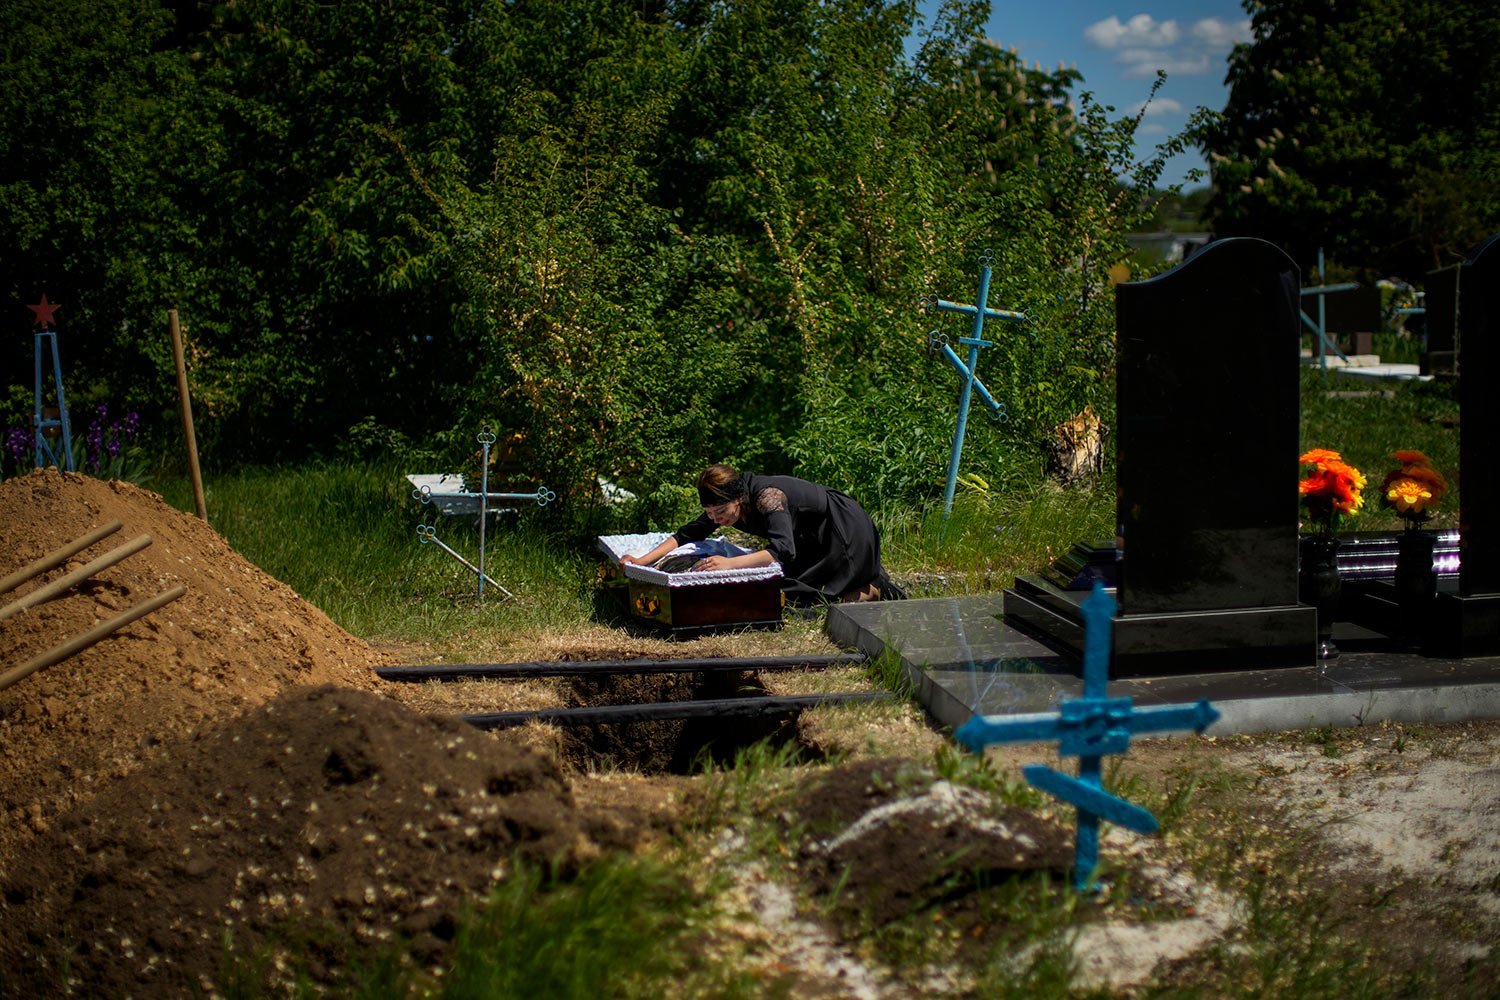  Iuliia Loseva cries over the coffin of her husband Volodymyr Losev, 38, during his funeral at a cemetery in Zorya Truda, Odesa region, Ukraine, Monday, May 16, 2022. Volodymyr Losev, a Ukrainian volunteer soldier, was killed on May 7 when the milita